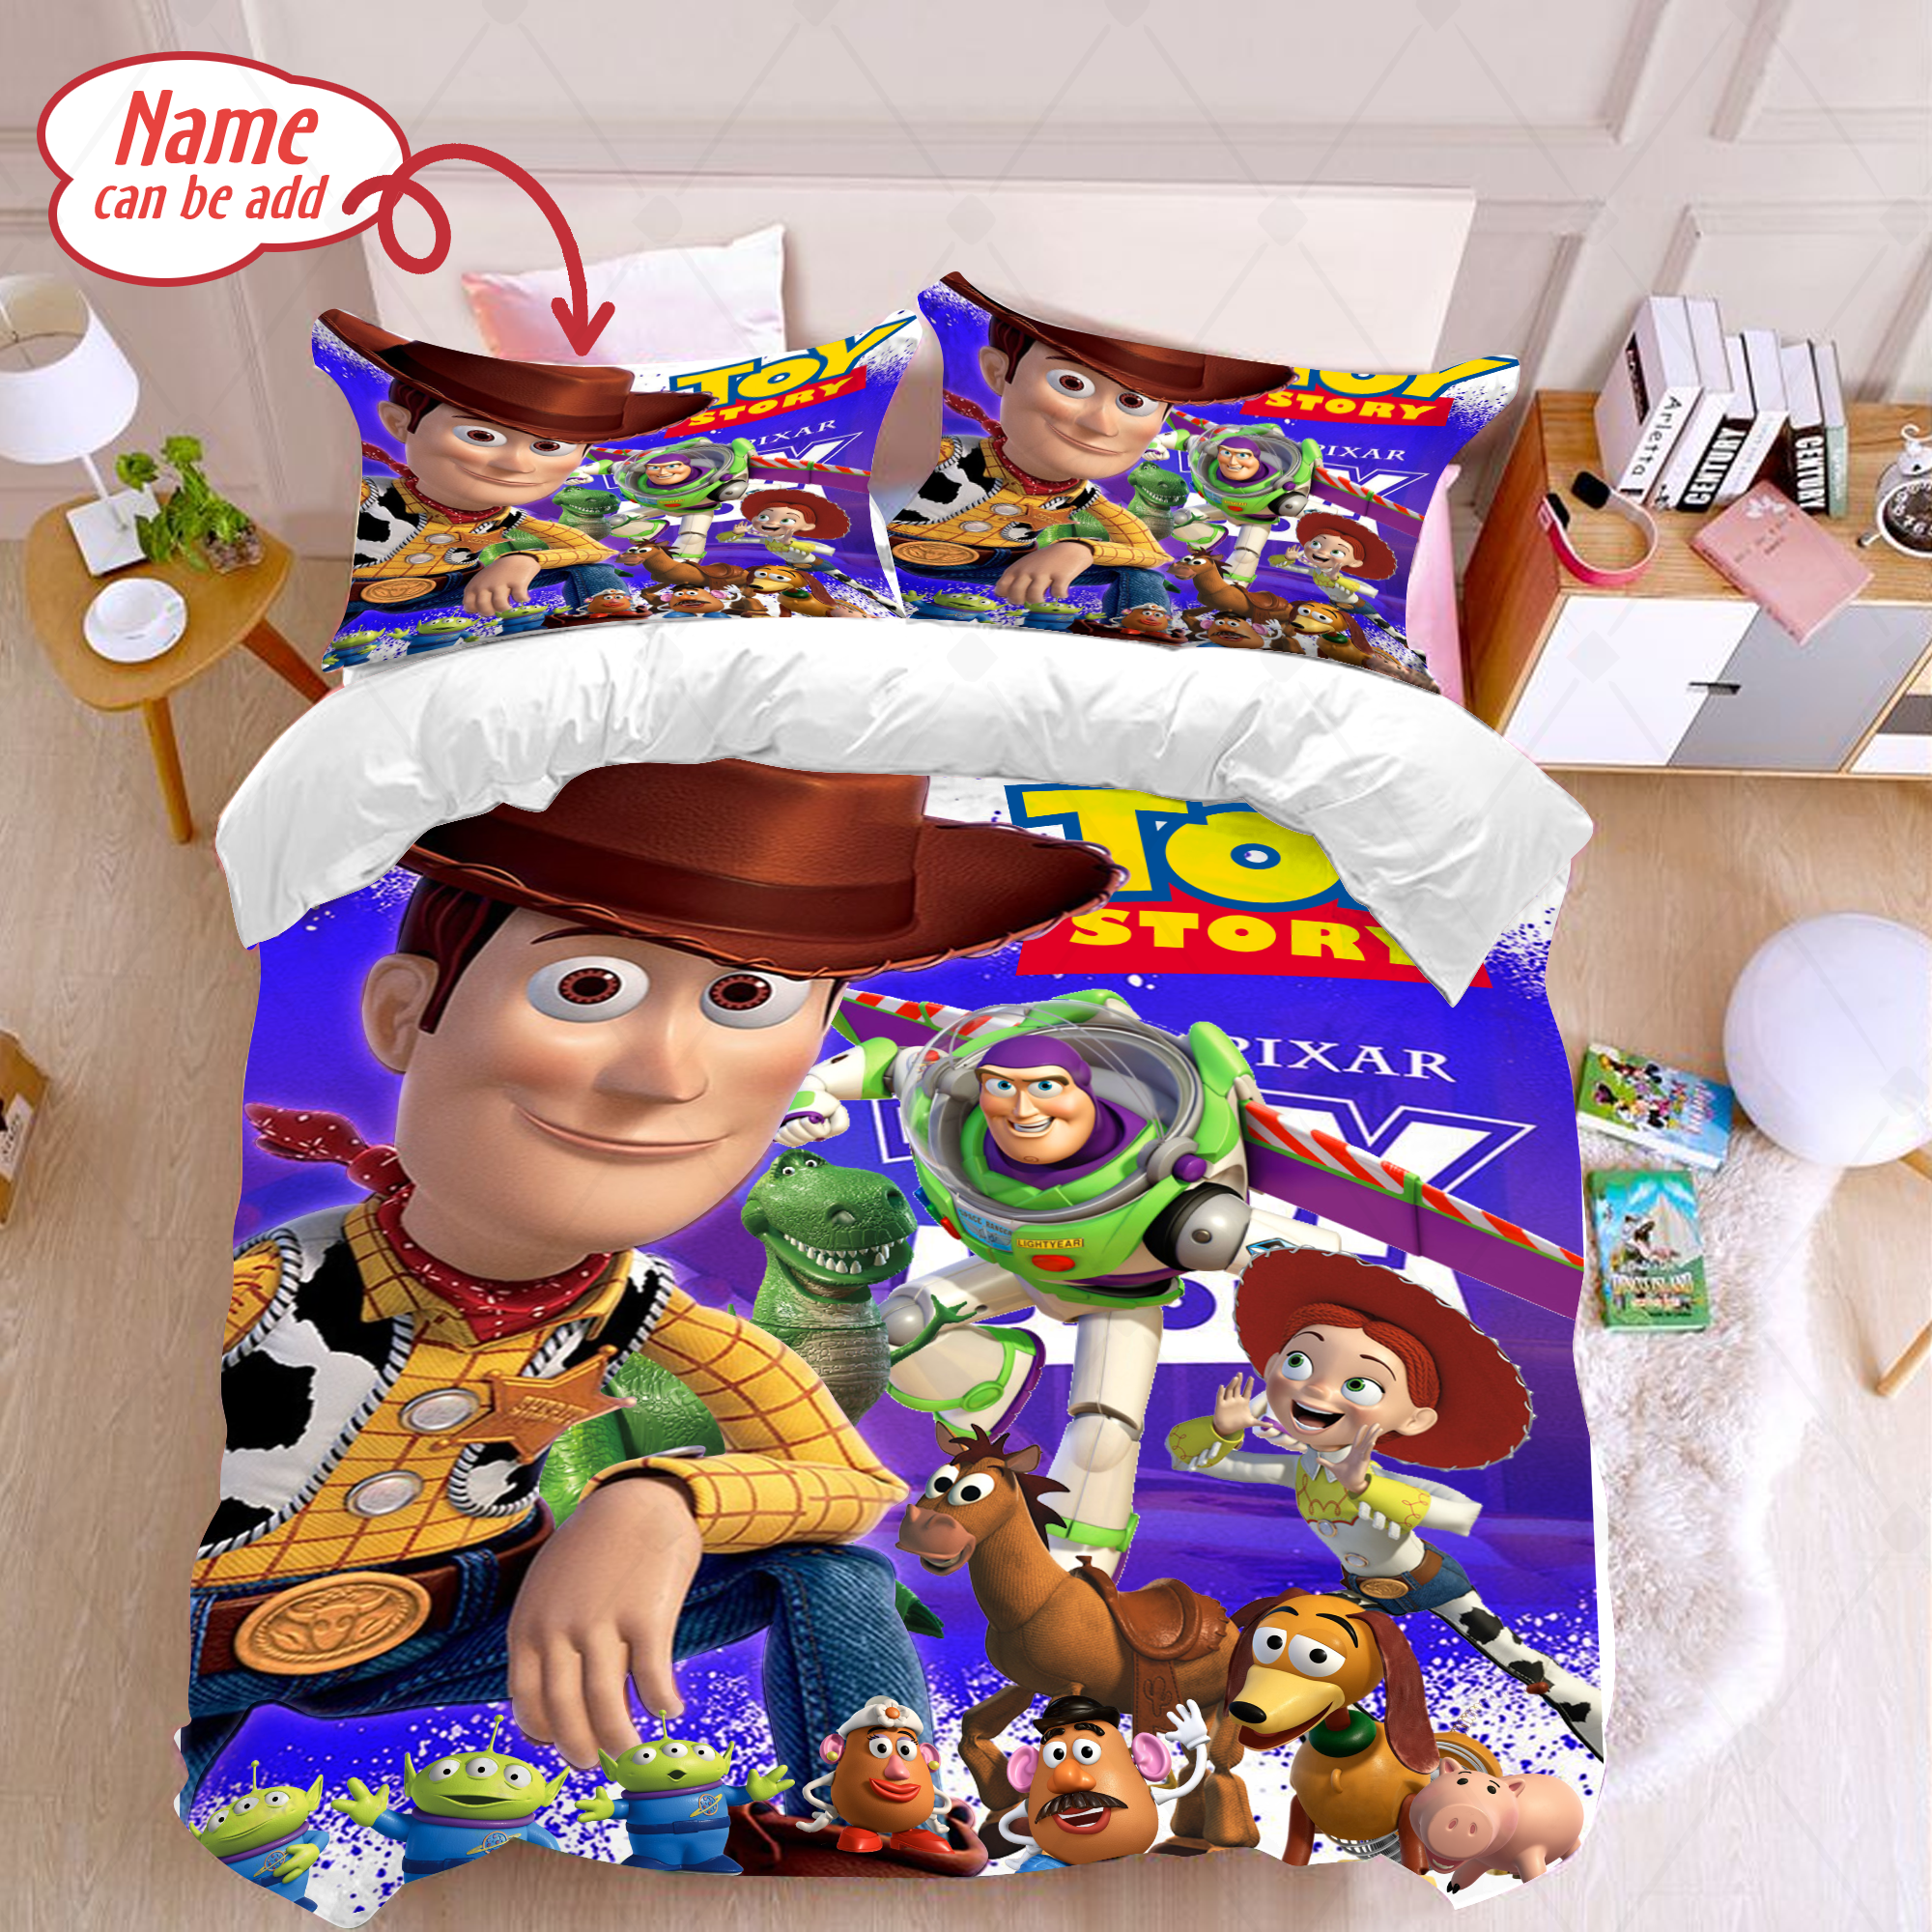 Personalized Toy Story Duvet Cover Bedding Set And Pillowcase Woody And Buzz Lightyear Blanket Toy Story Fan Gifts